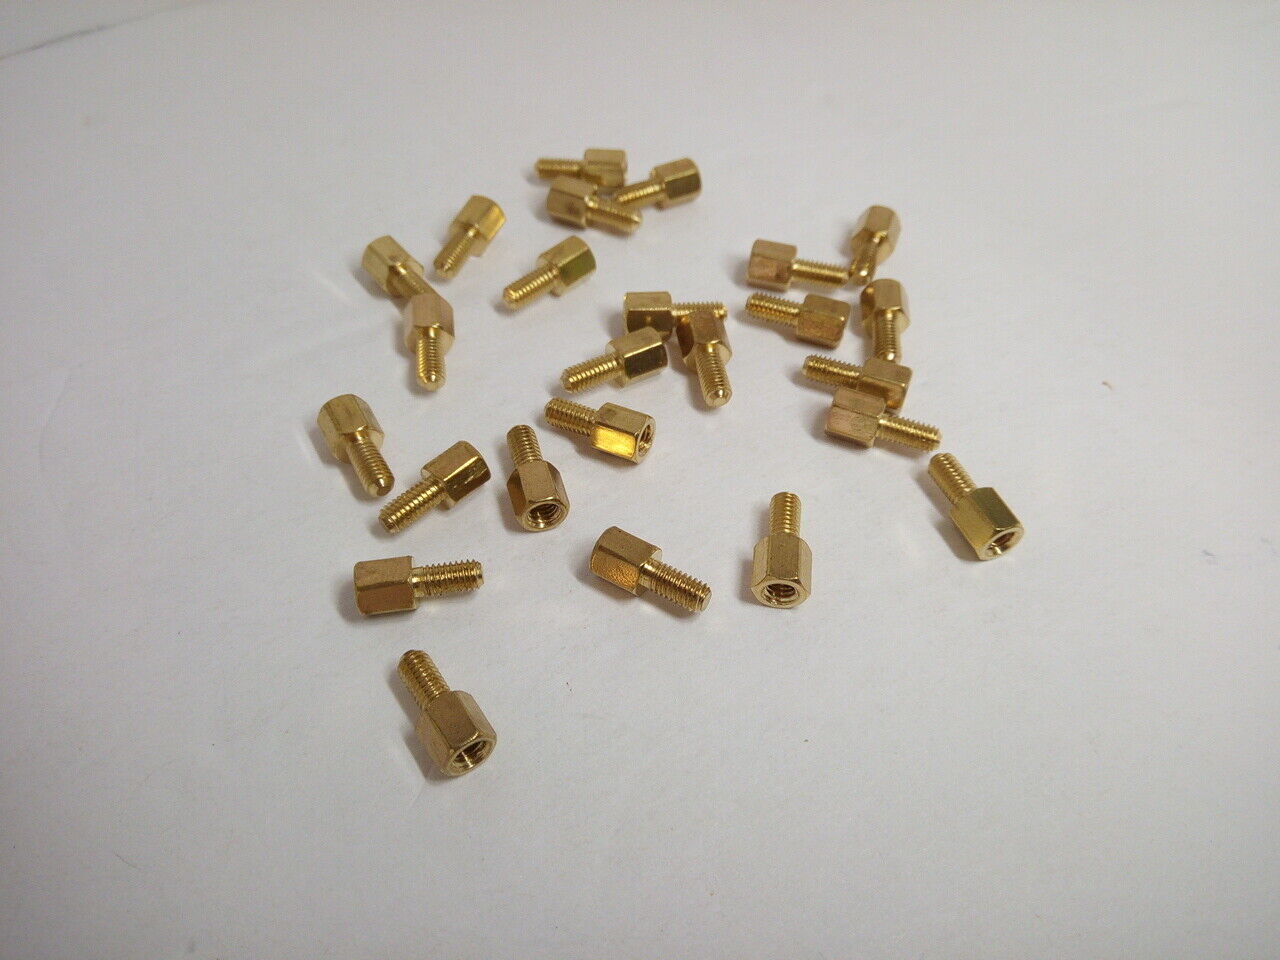 25 Pack Brass M3 5+6mm Standoff Hex Threaded Male Female PCB Pan Spacers Pillars